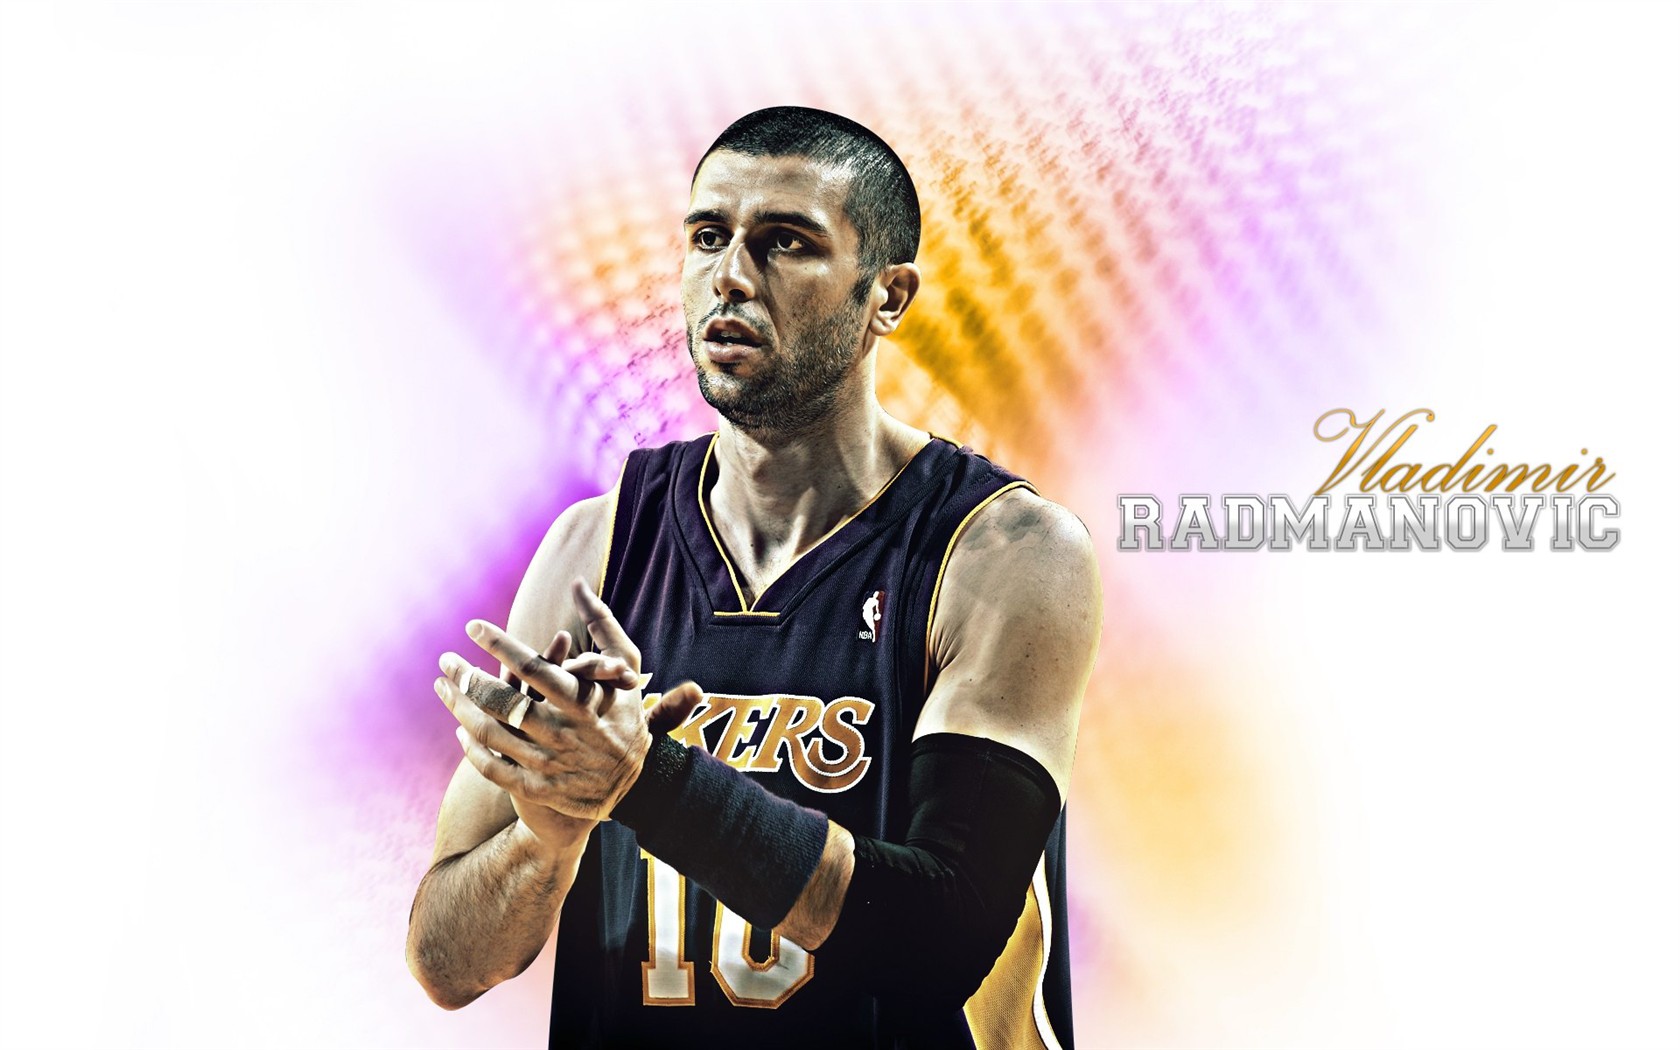 Los Angeles Lakers Wallpaper Oficial #29 - 1680x1050